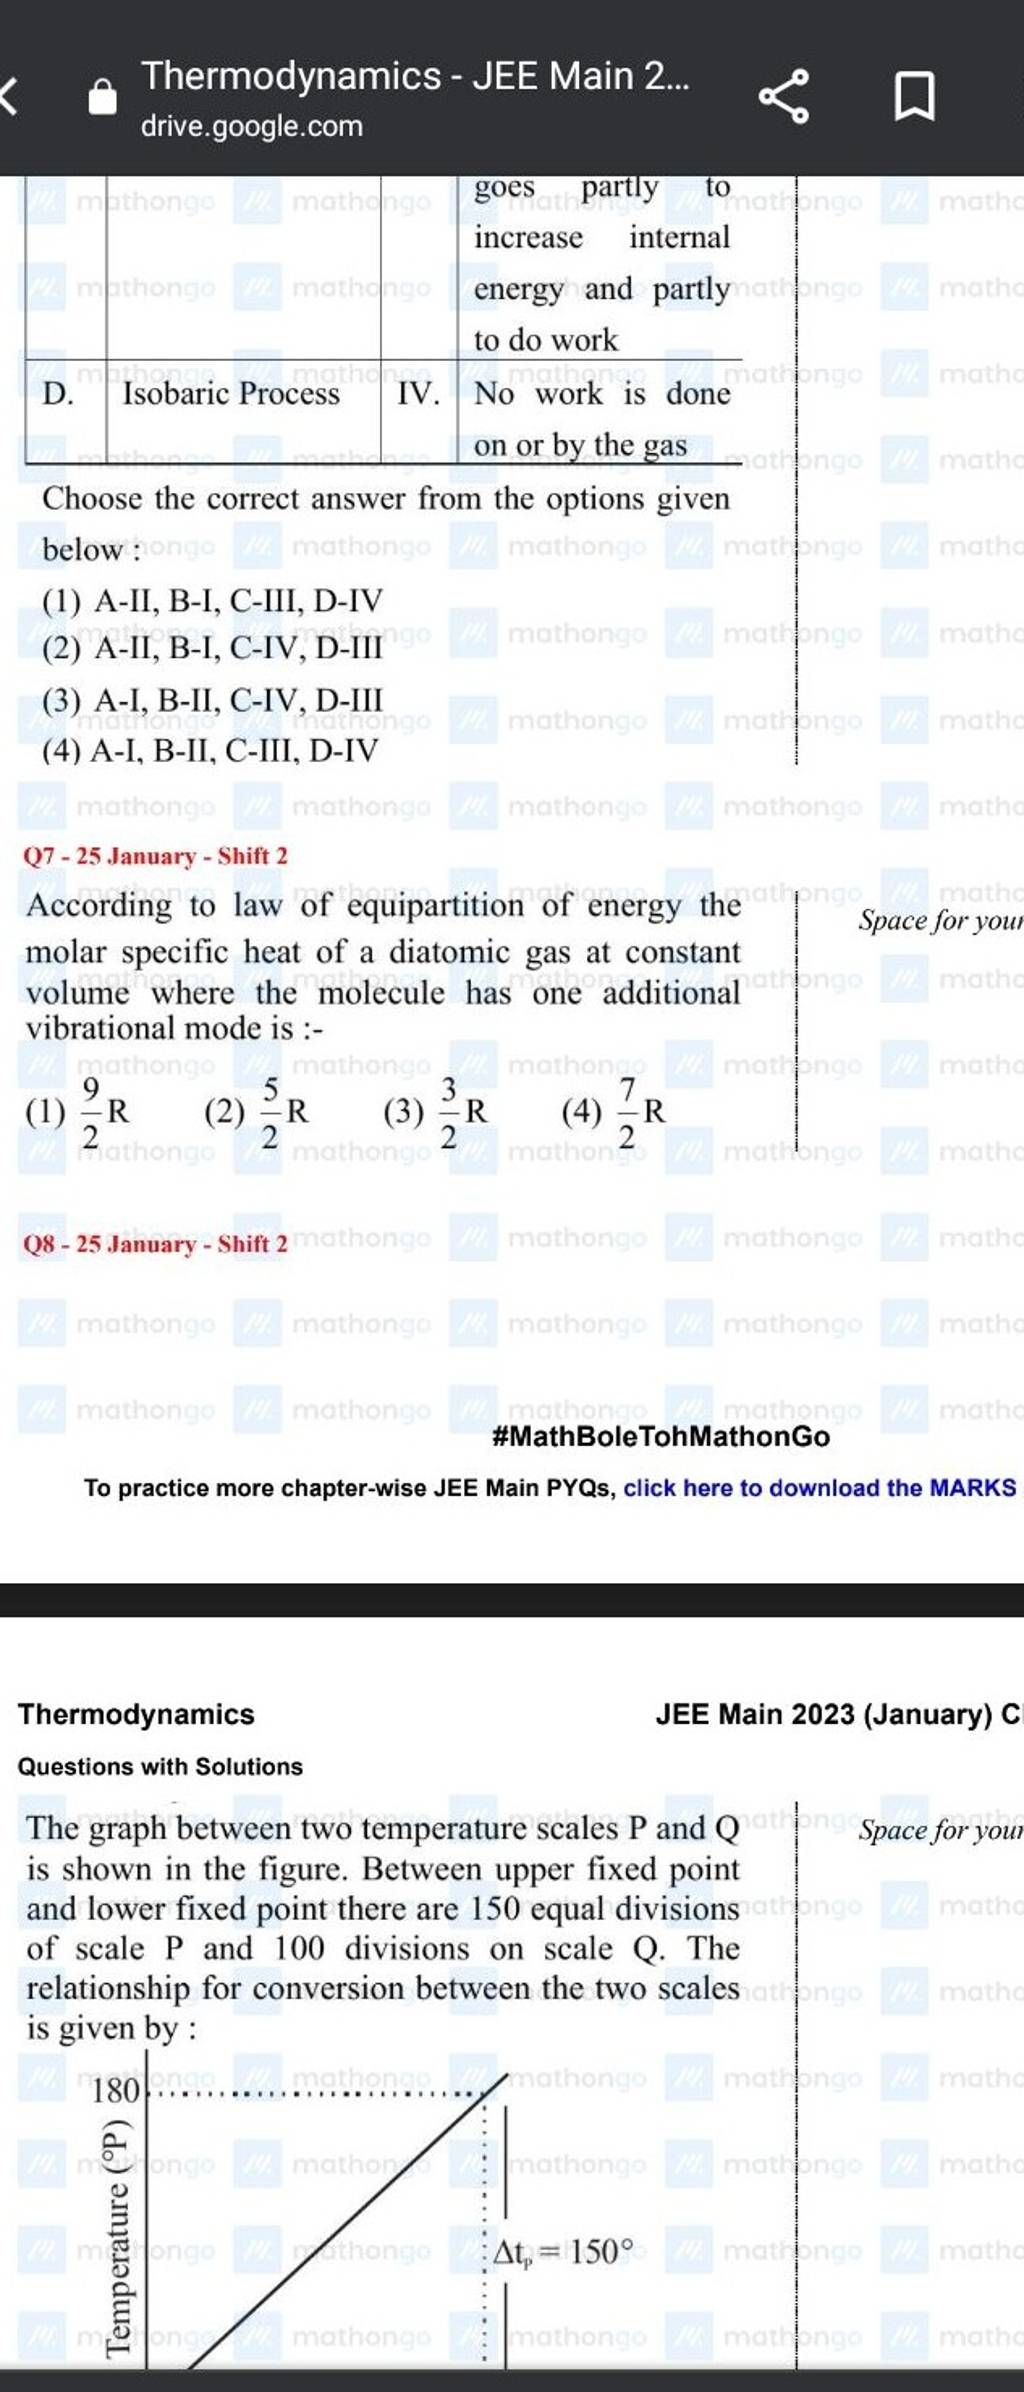 Q7 - 25 January - Shift 2 According to law of equipartition of energy 